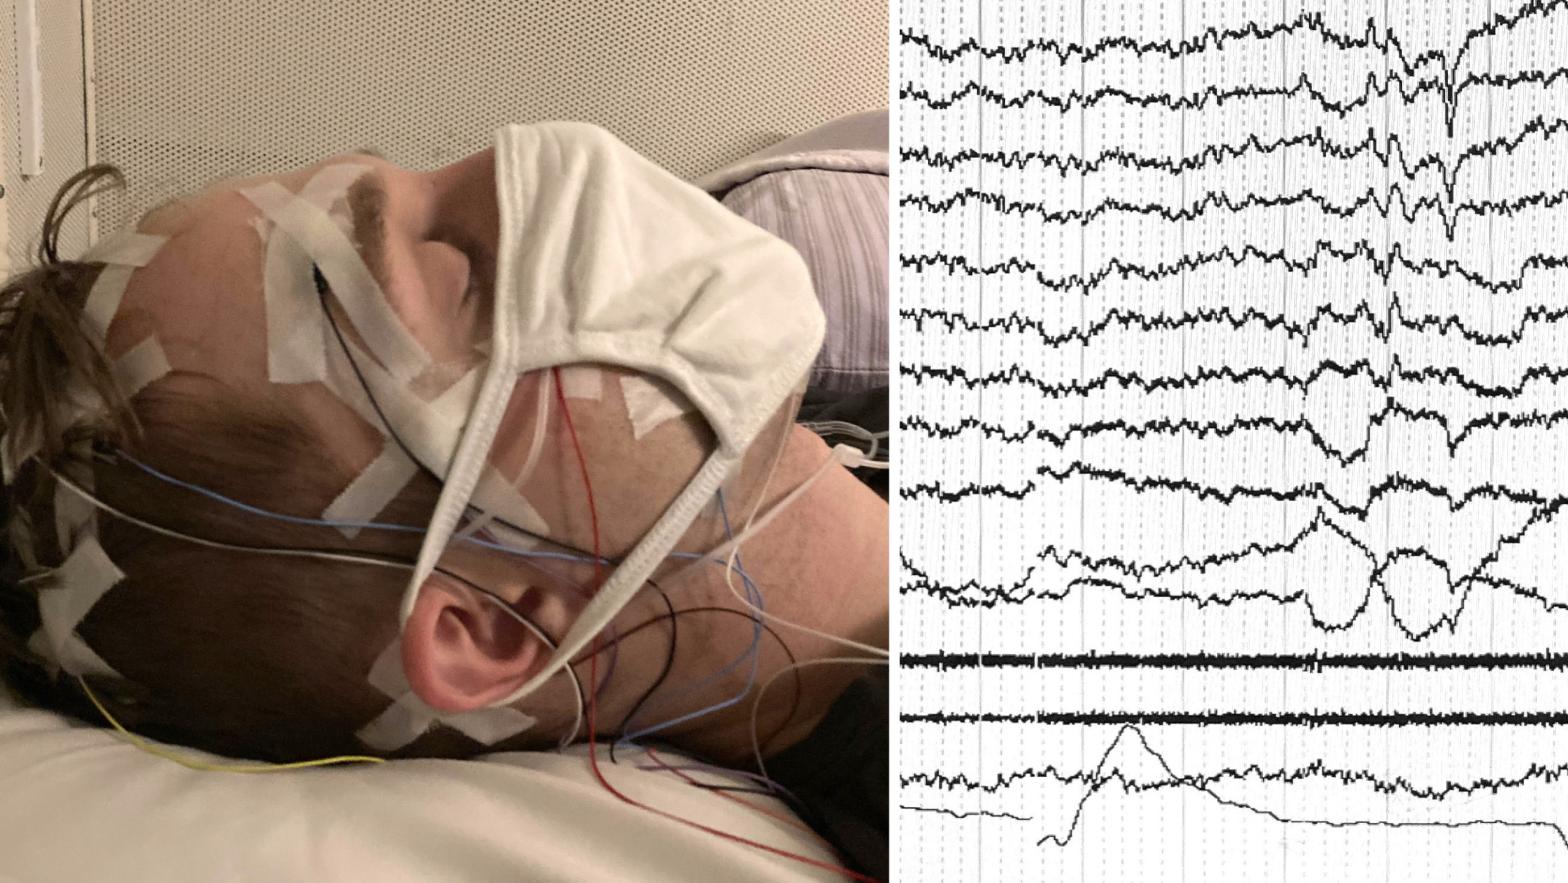 Electrical signals from a sleeping person's brain are shown on the monitor. (Image: K Konkoly)